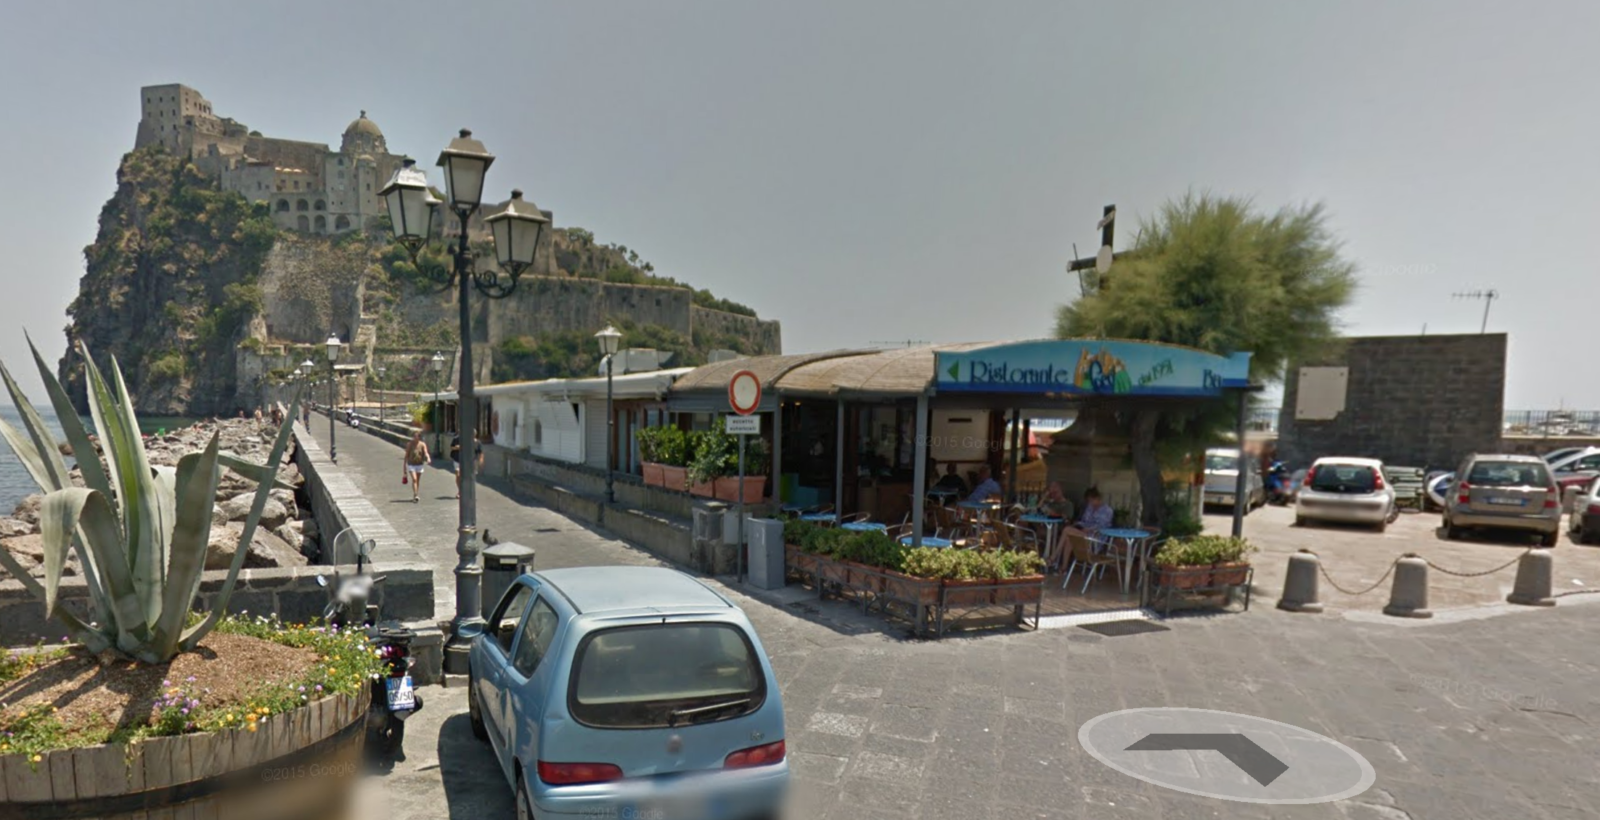 Thanks, google maps, for the shot of the gelato shop.